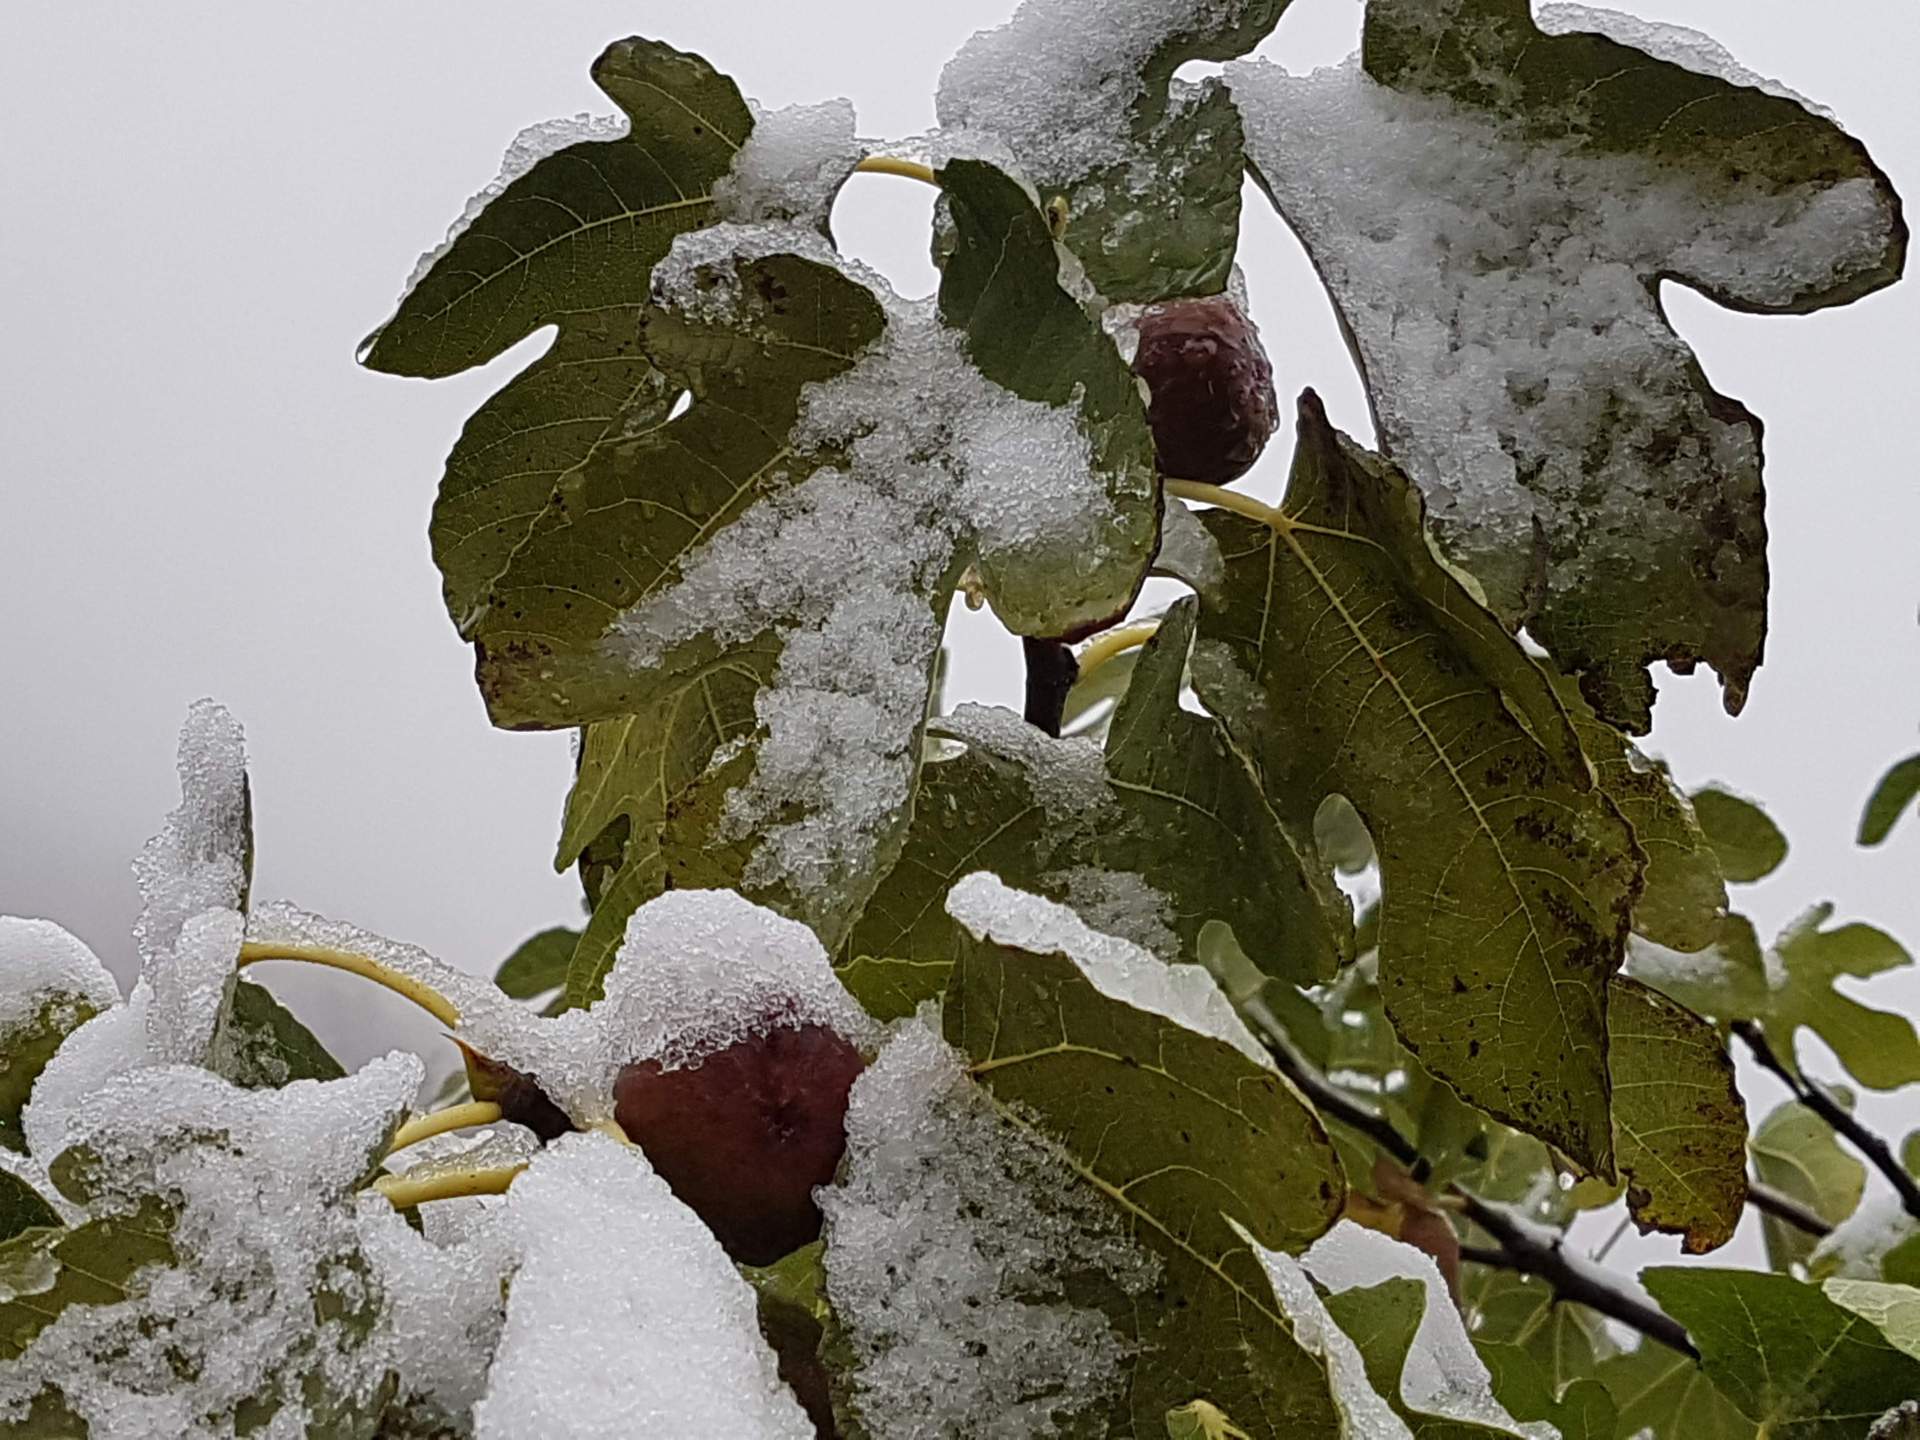 Fig. 1: On October 28, 2018 in Sarganserland the ripe figs were surprised by the snow; Source: Roger Perret